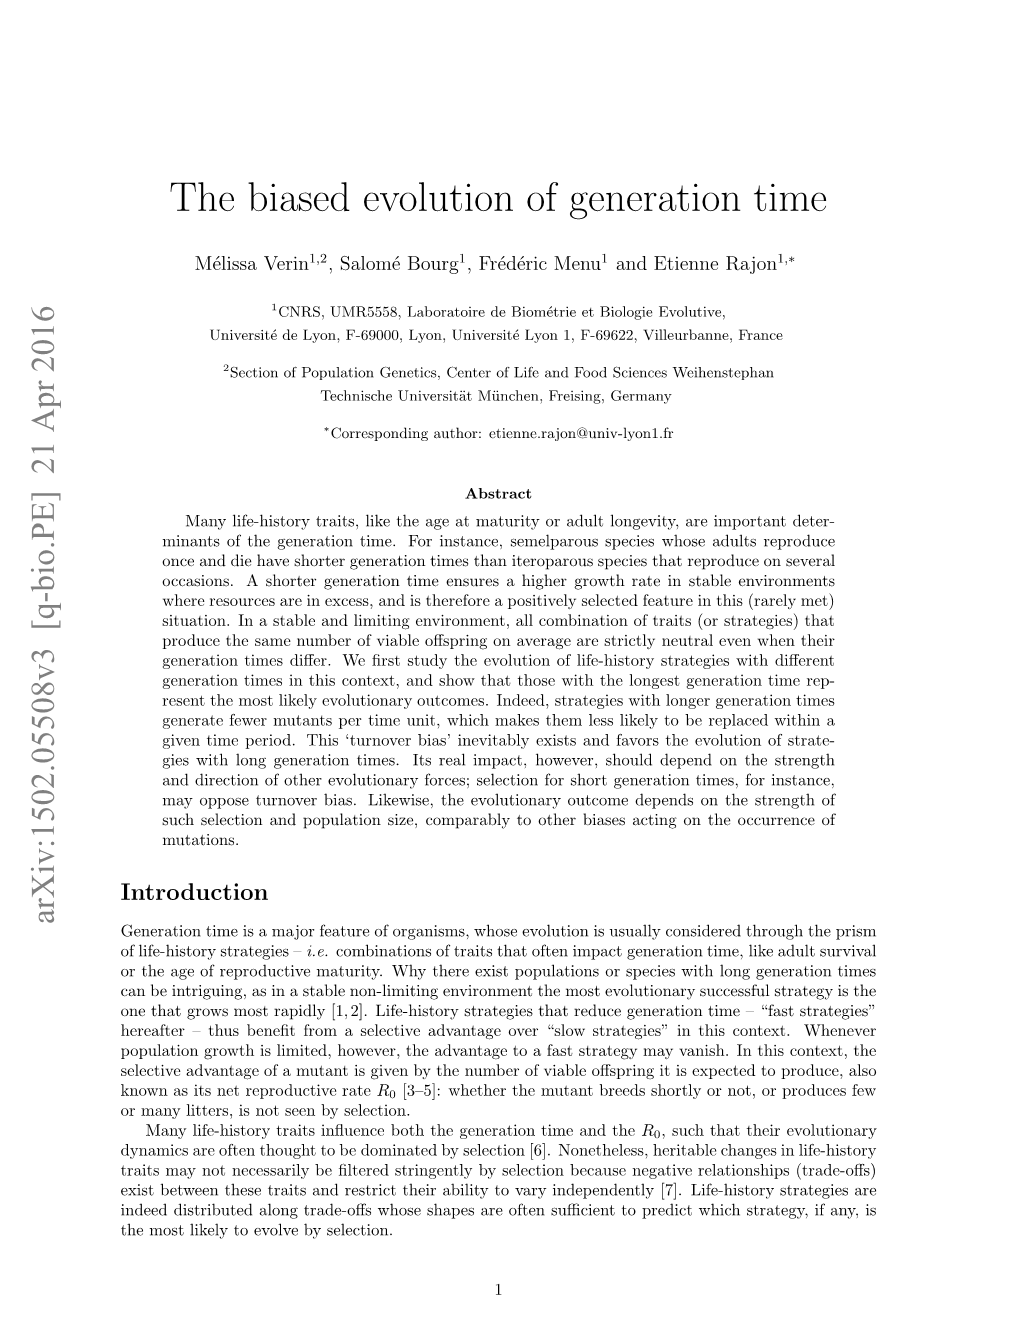 The Biased Evolution of Generation Time